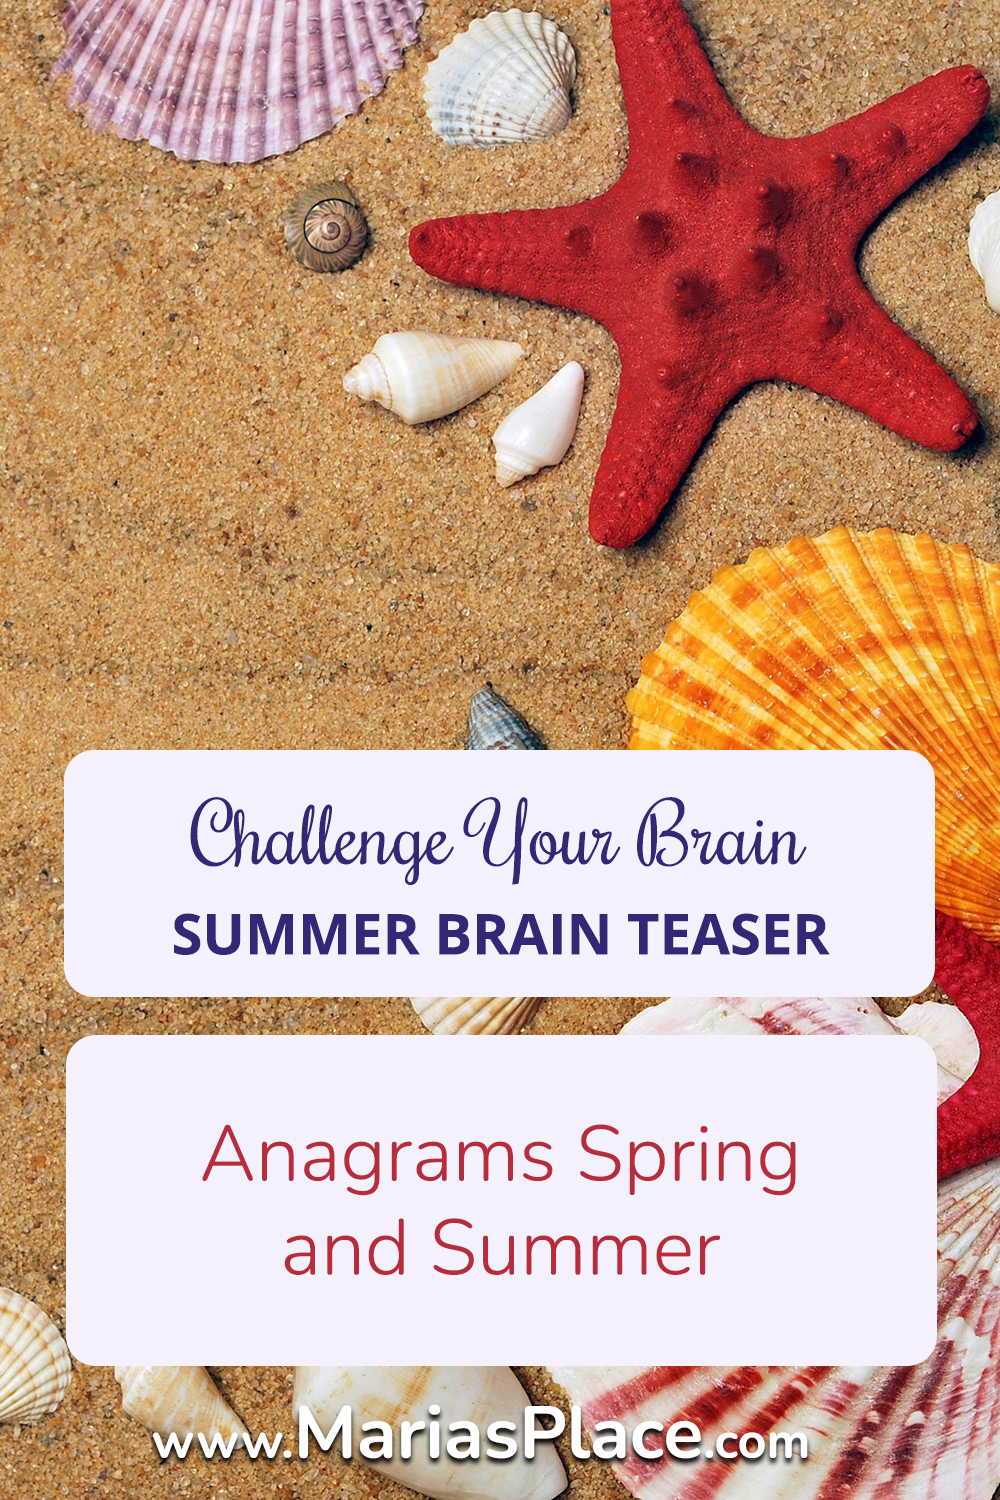 Anagrams : Spring and Summer